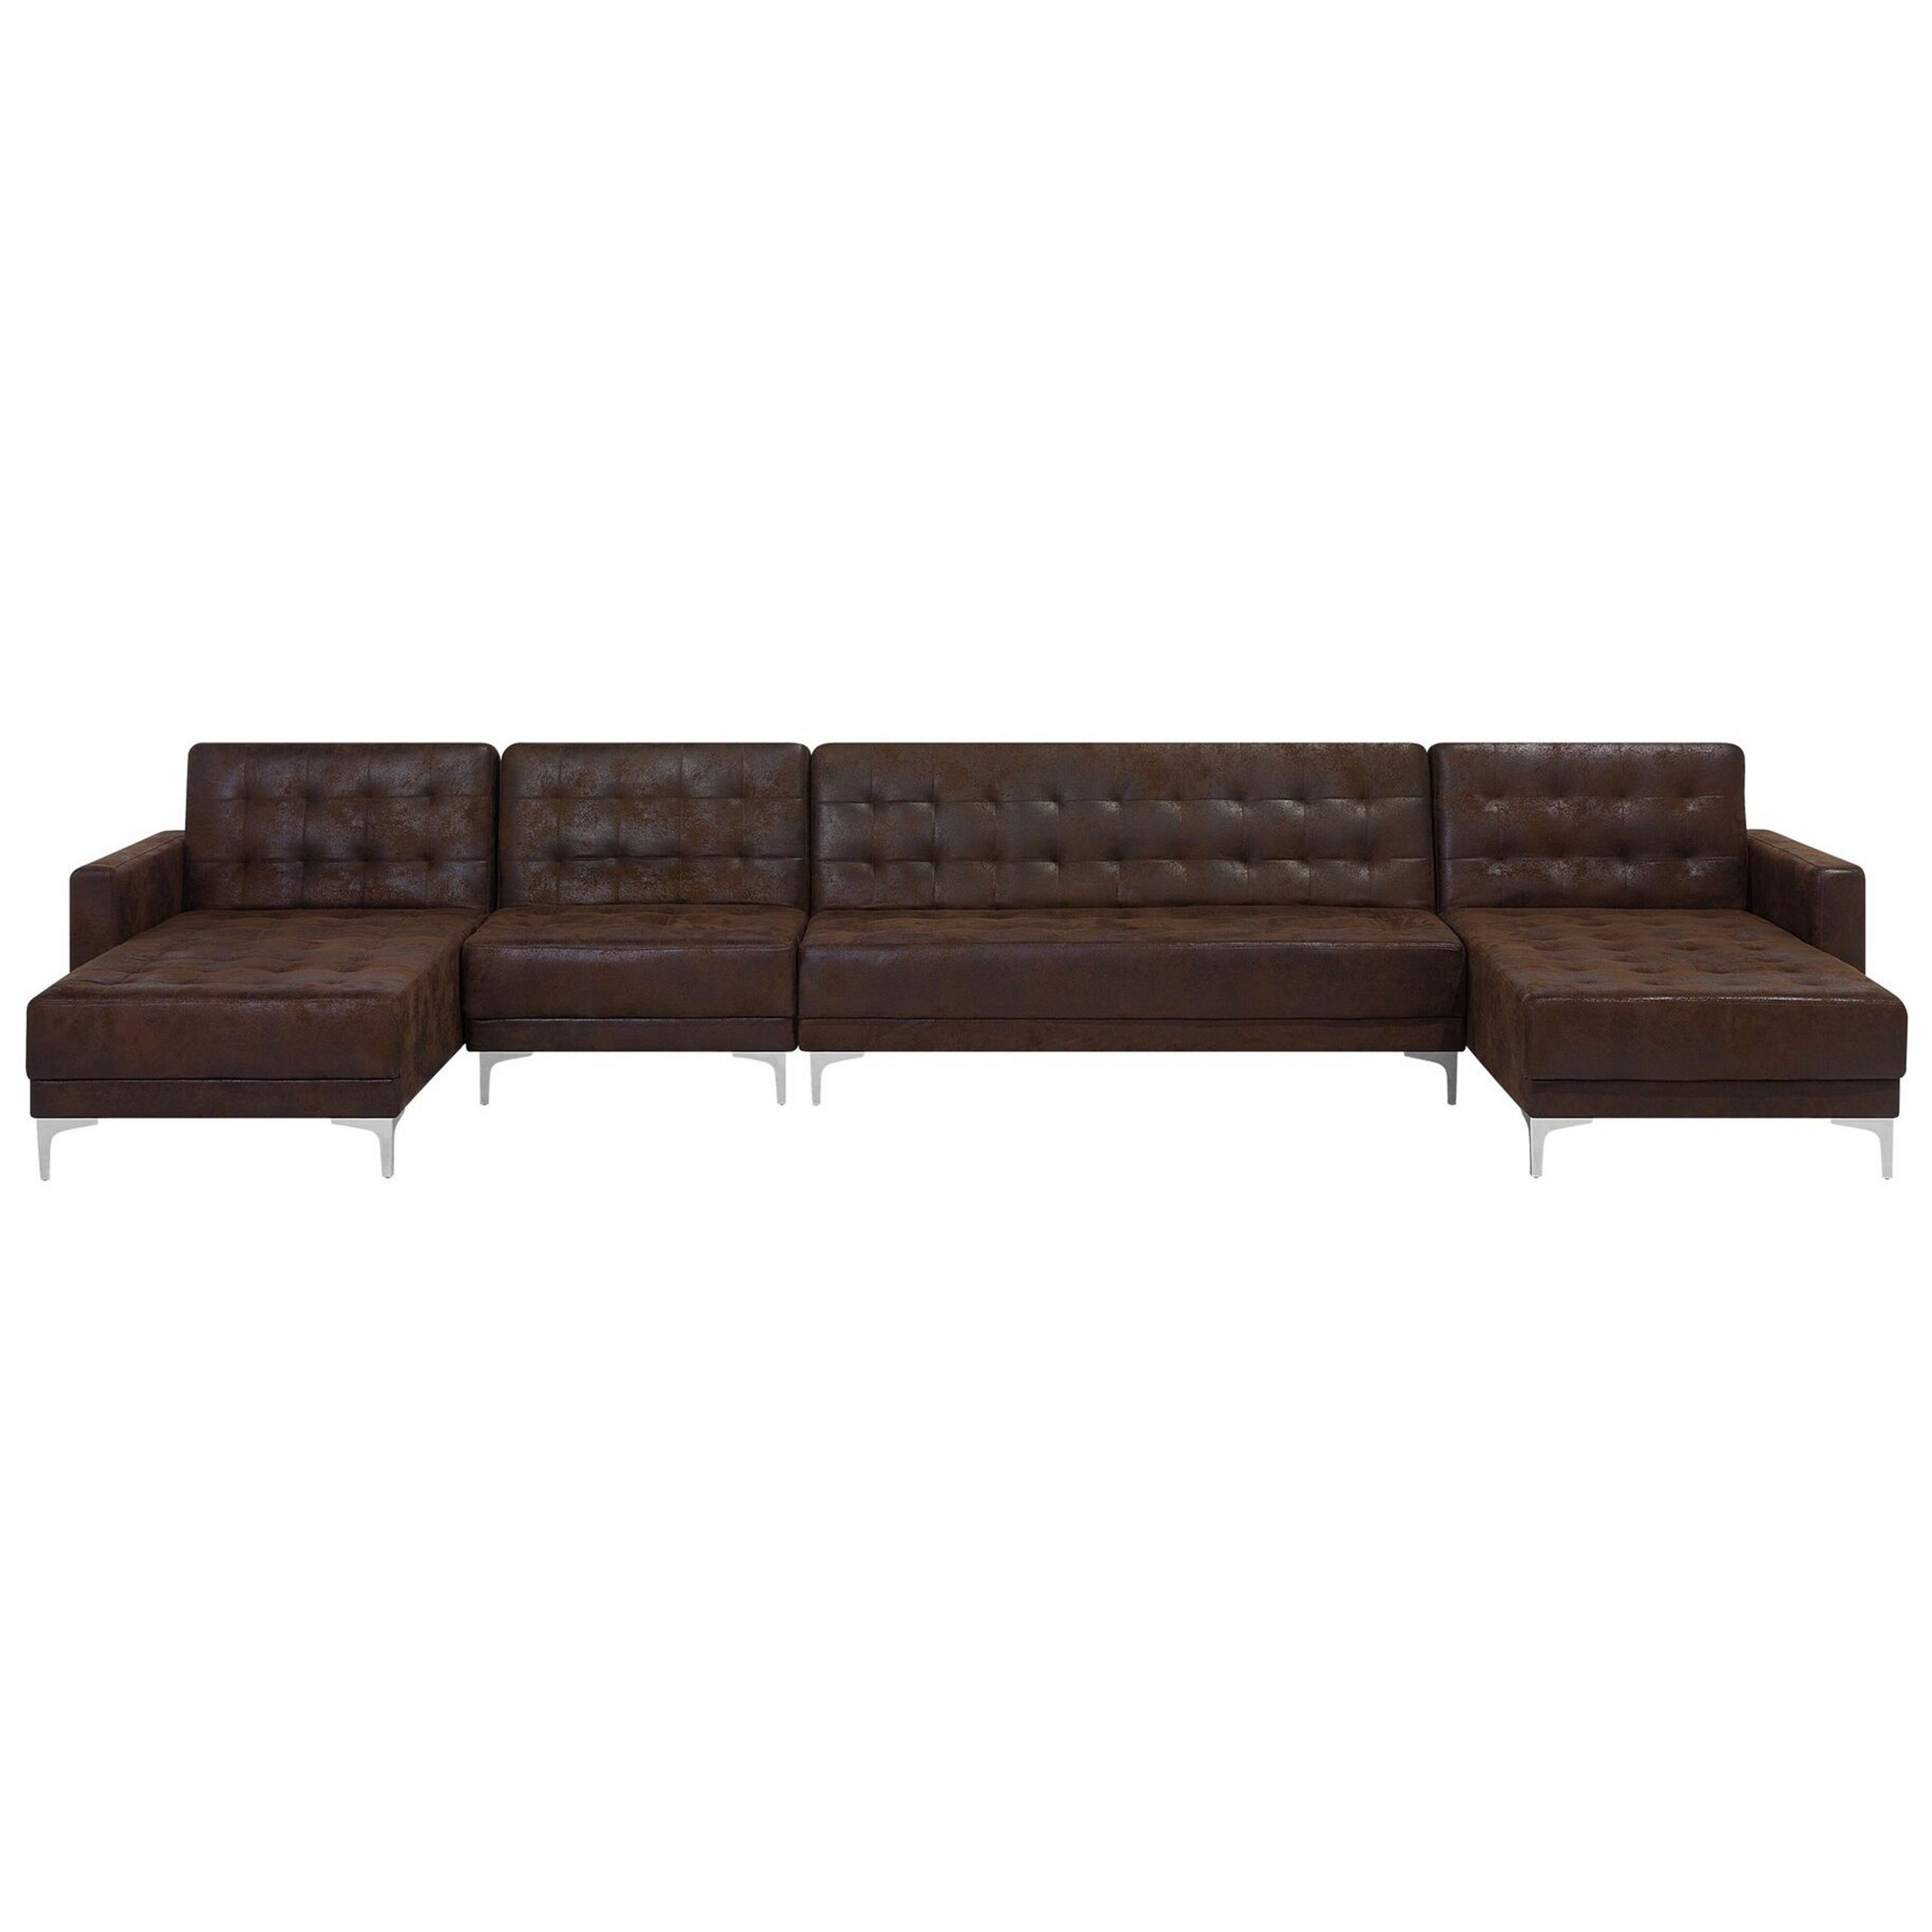 Beliani Corner Sofa Bed Brown Faux Leather Tufted Modern U-Shaped Modular 6 Seater Chaise Longues